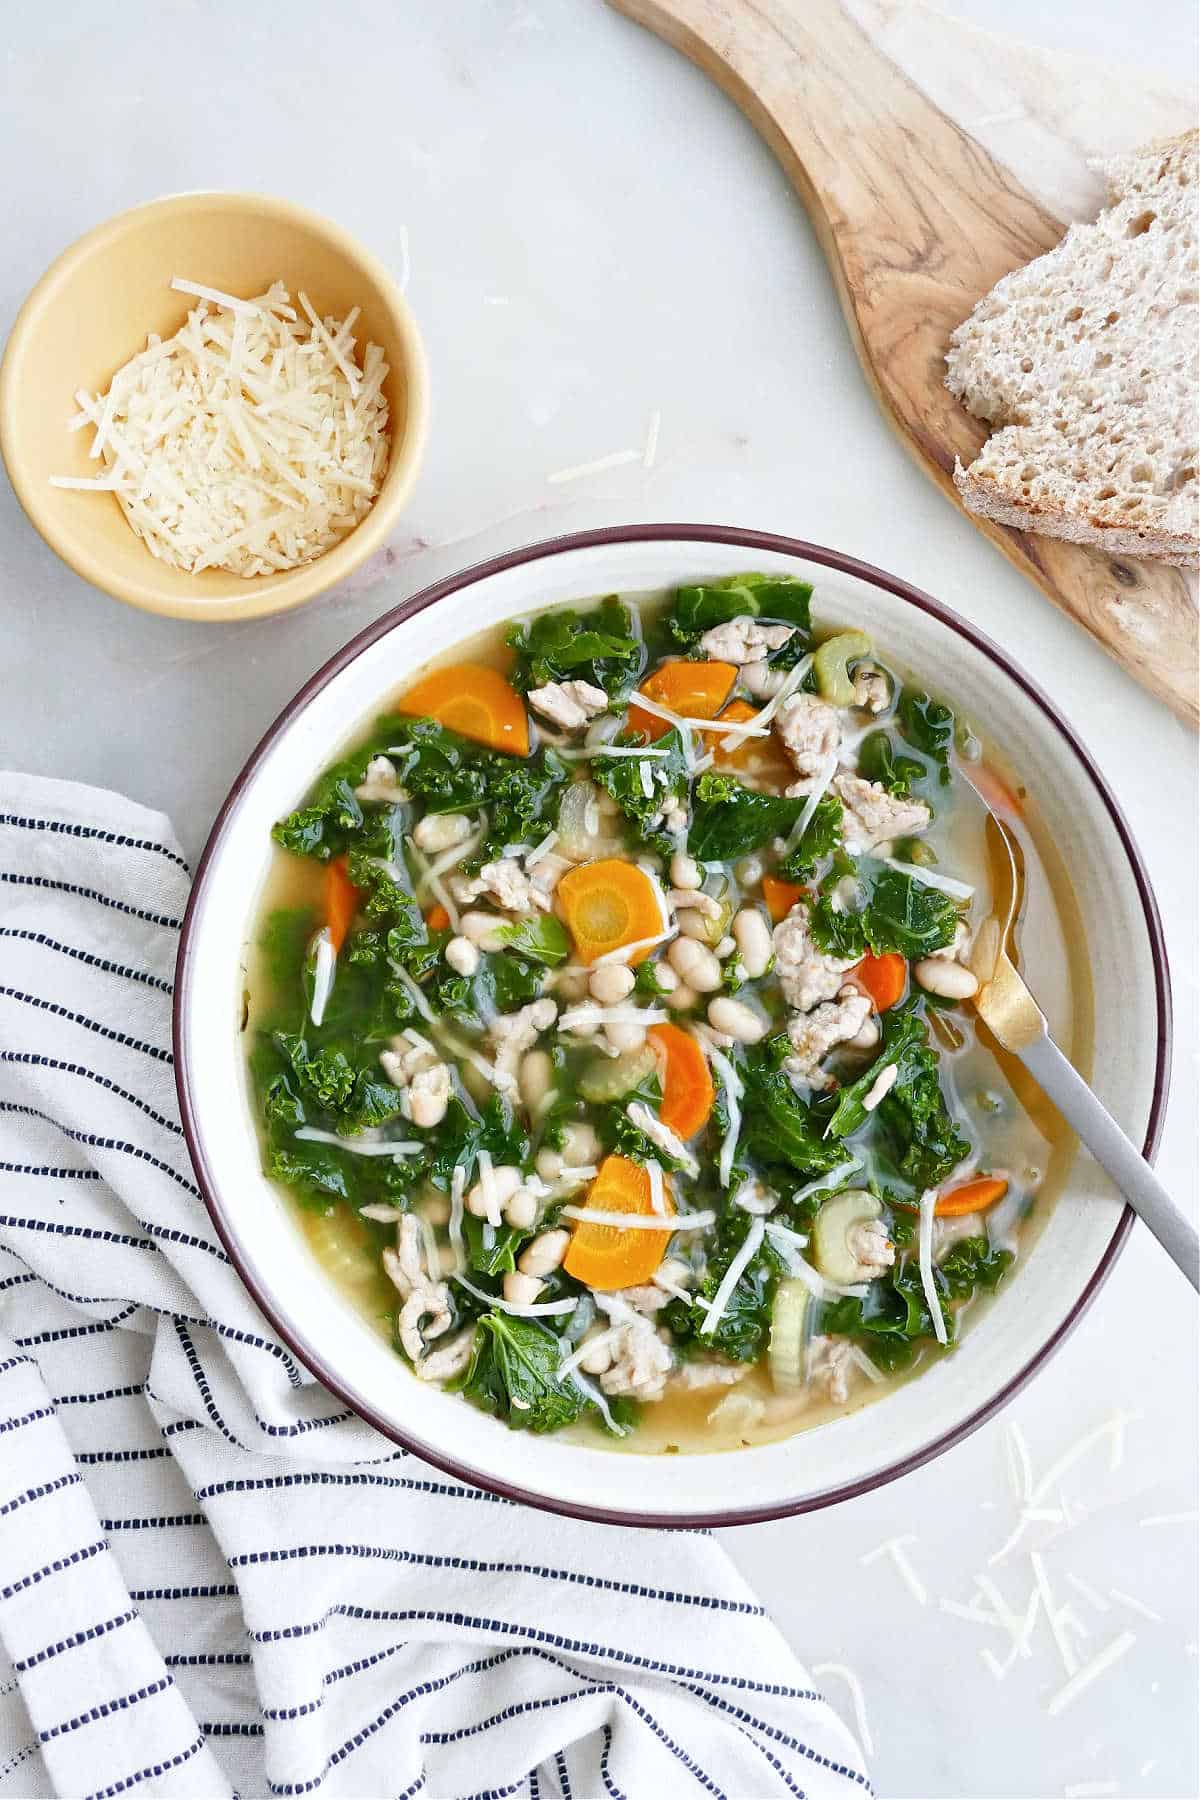 Easy and delicious slow cooker kale and white bean soup with sausage. Gluten-free and filled with vegetables!